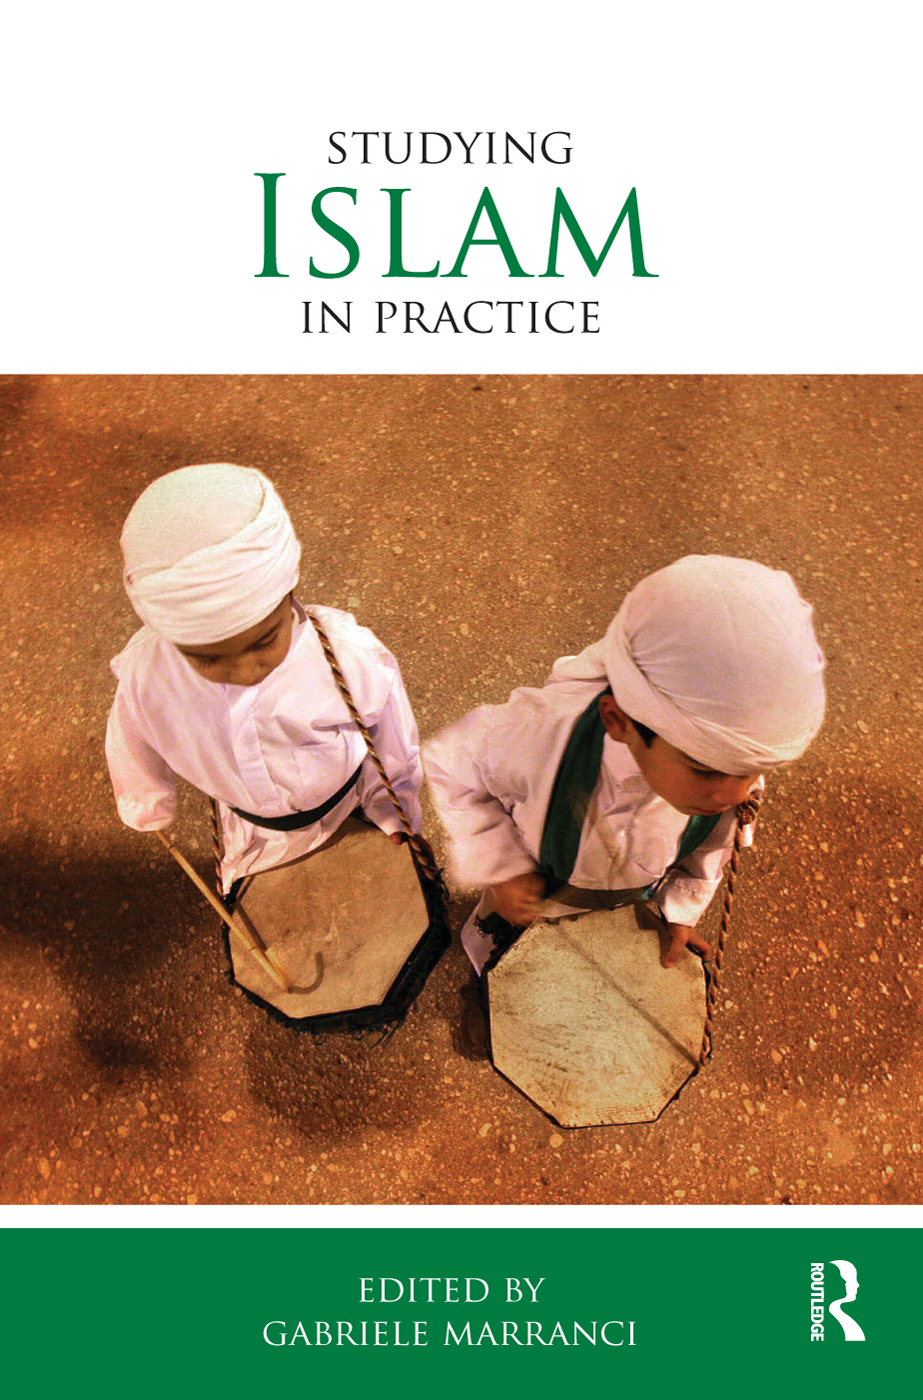 Studying Islam in Practice This book presents Islam as a lived religion through - photo 1